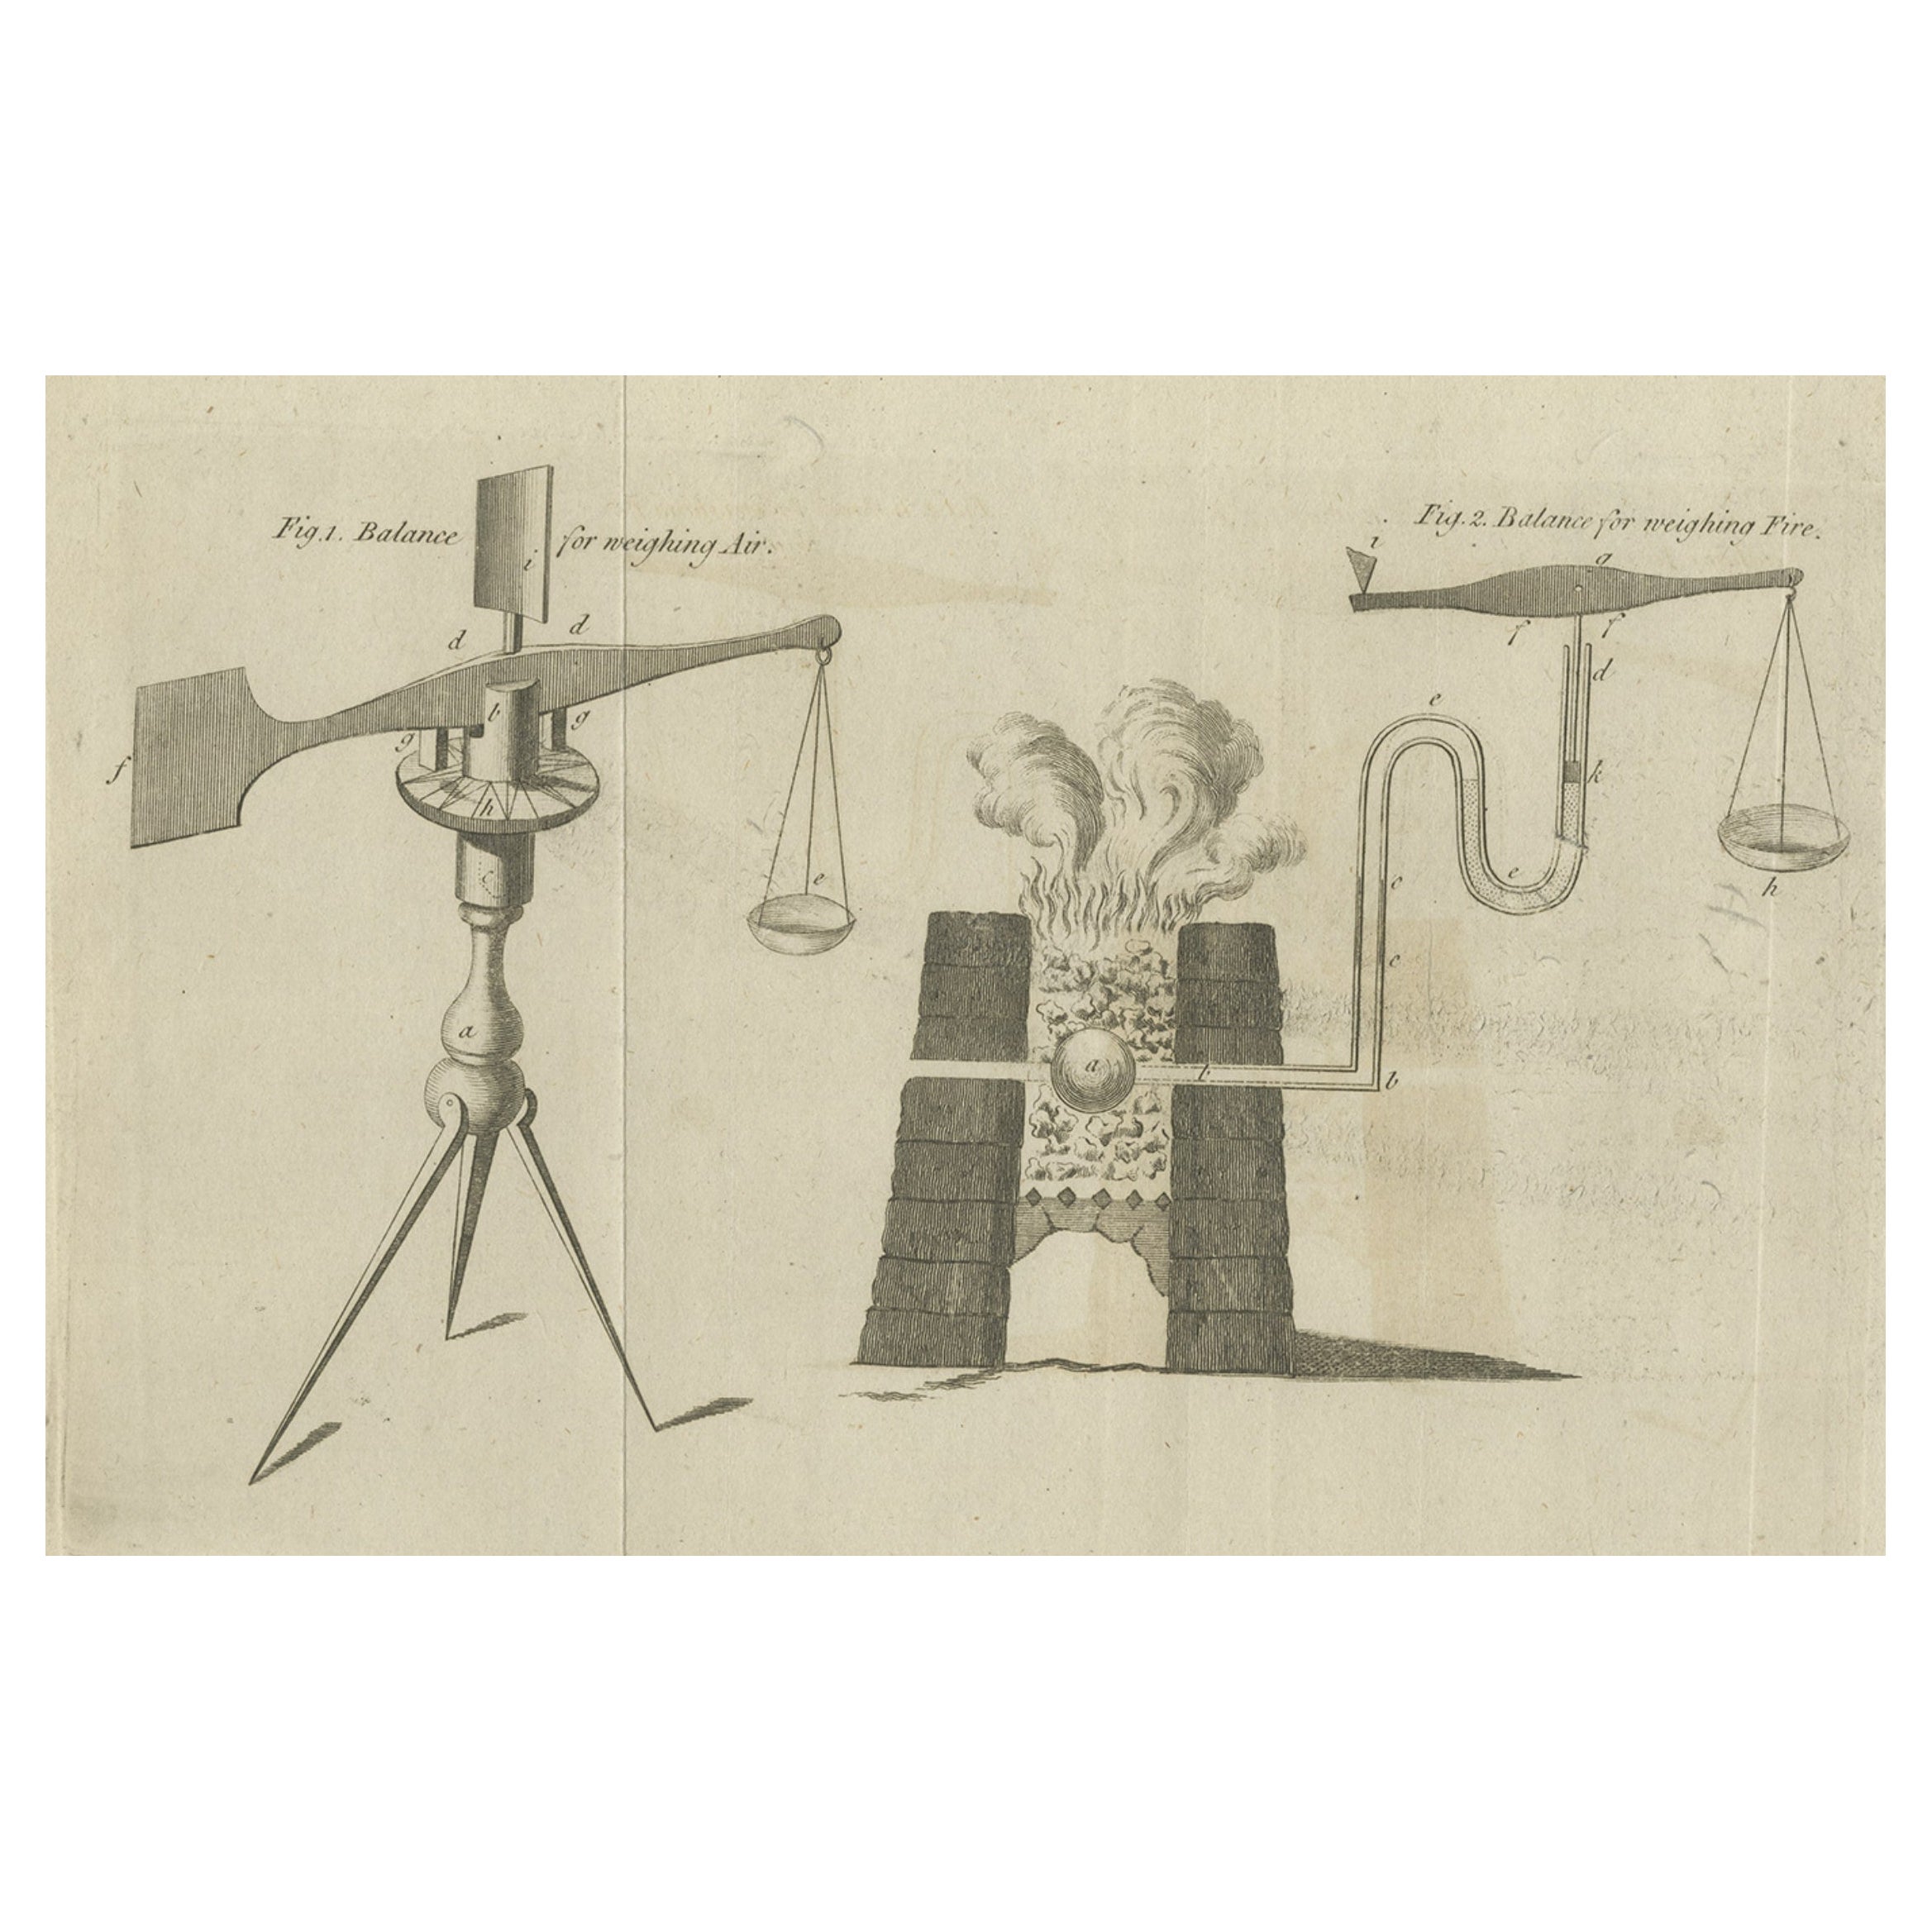 Antique Print of Two Balances for Weighing Fire and Air, c.1780